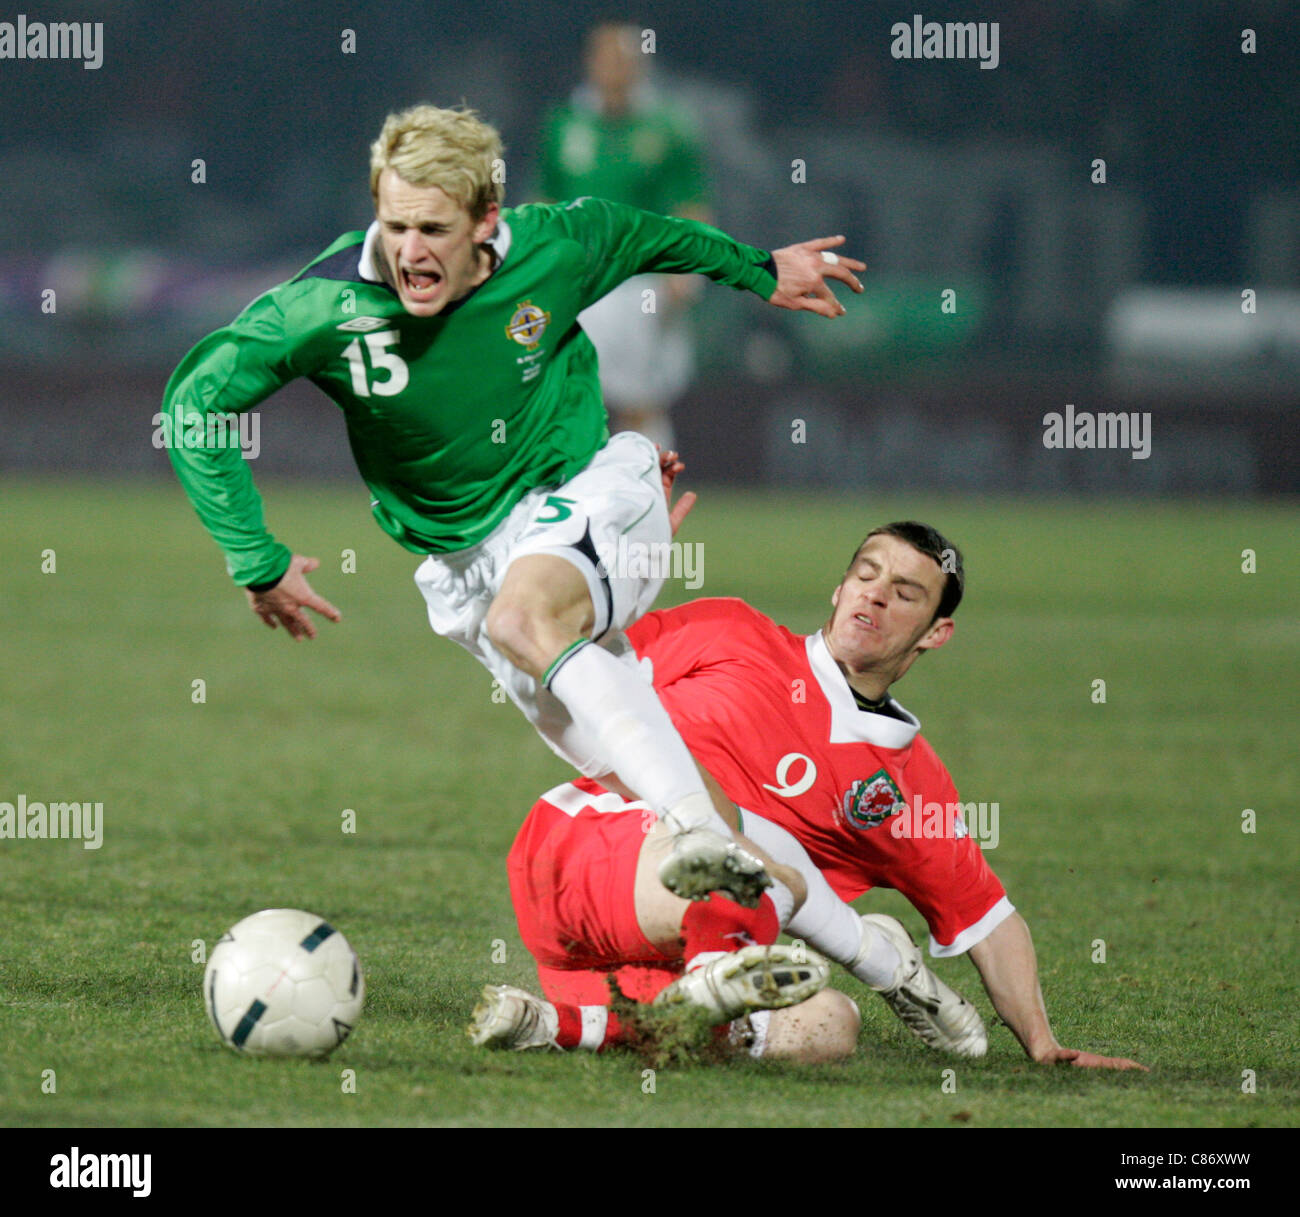 Northern Irelands Dean Shiels (15) goes flying after a tackle from behind by Wales Jason Koumas (9). Northern Ireland and Wales drew 0-0 in this friendly. Northern Ireland v Wales international friendly, Windsor Park, Belfast, 6th February 2007 Stock Photo